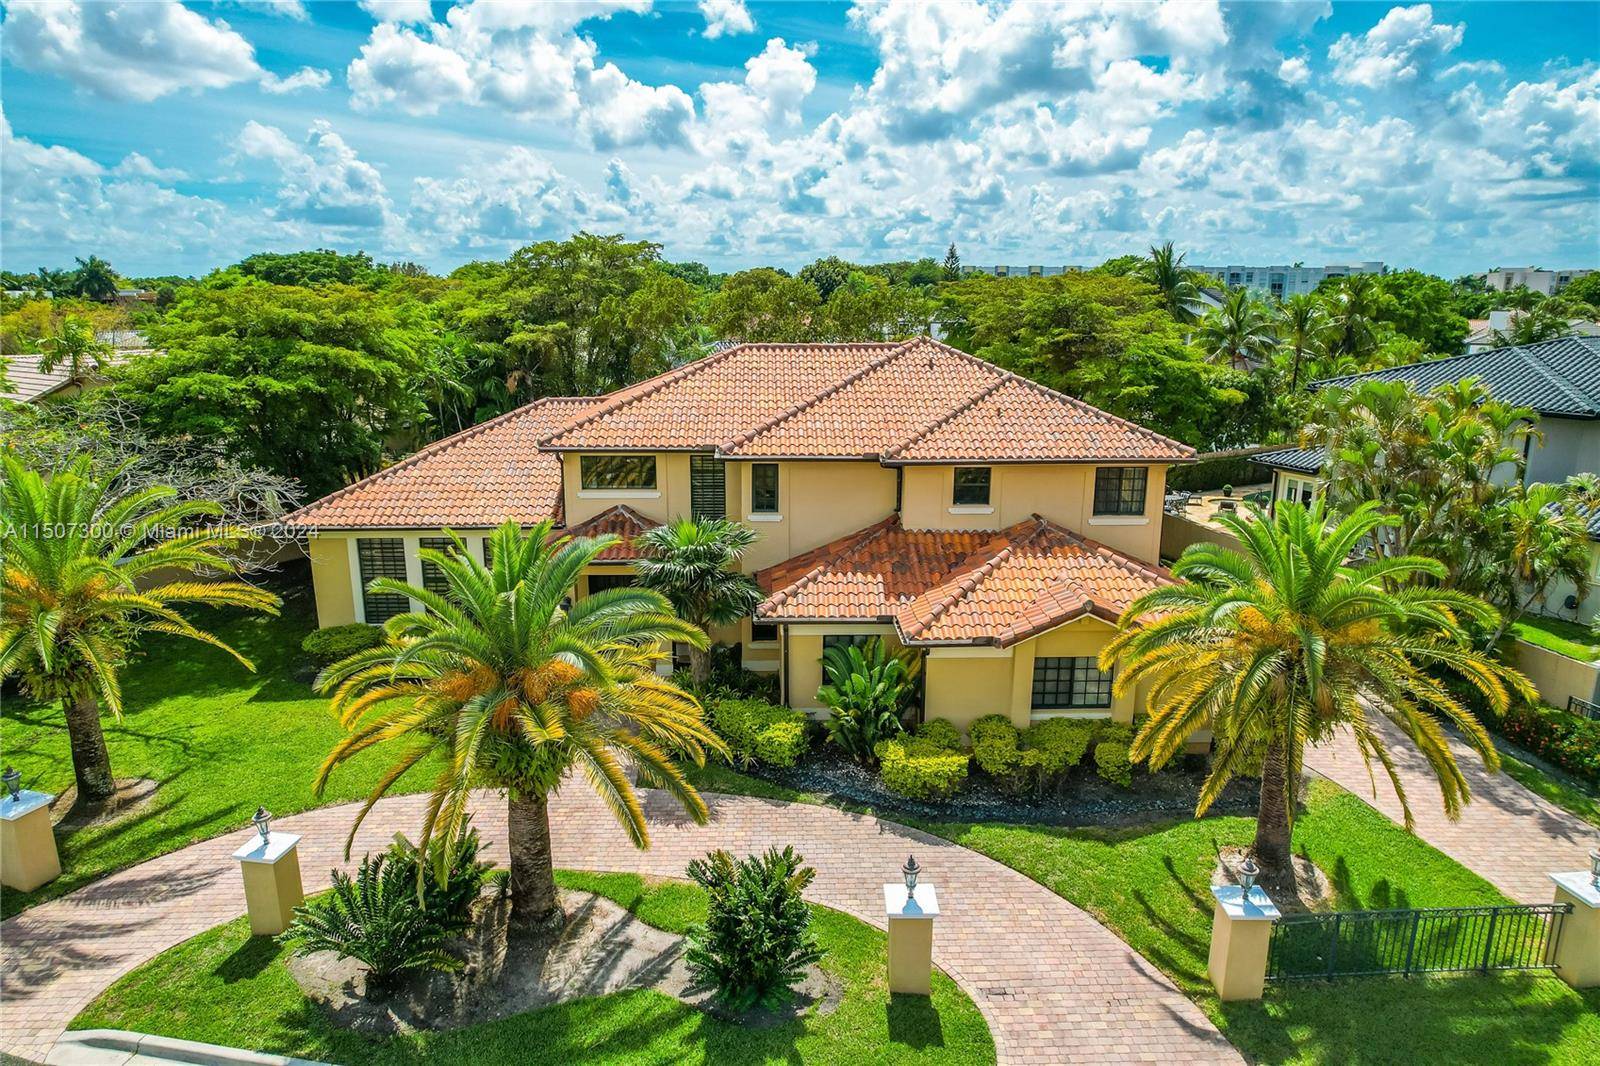 DORAL ESTATE custom build Mediterranean 2 STORY CUSTOM ultra luxury home, meticulously crafted with an uncompromising commitment to quality.